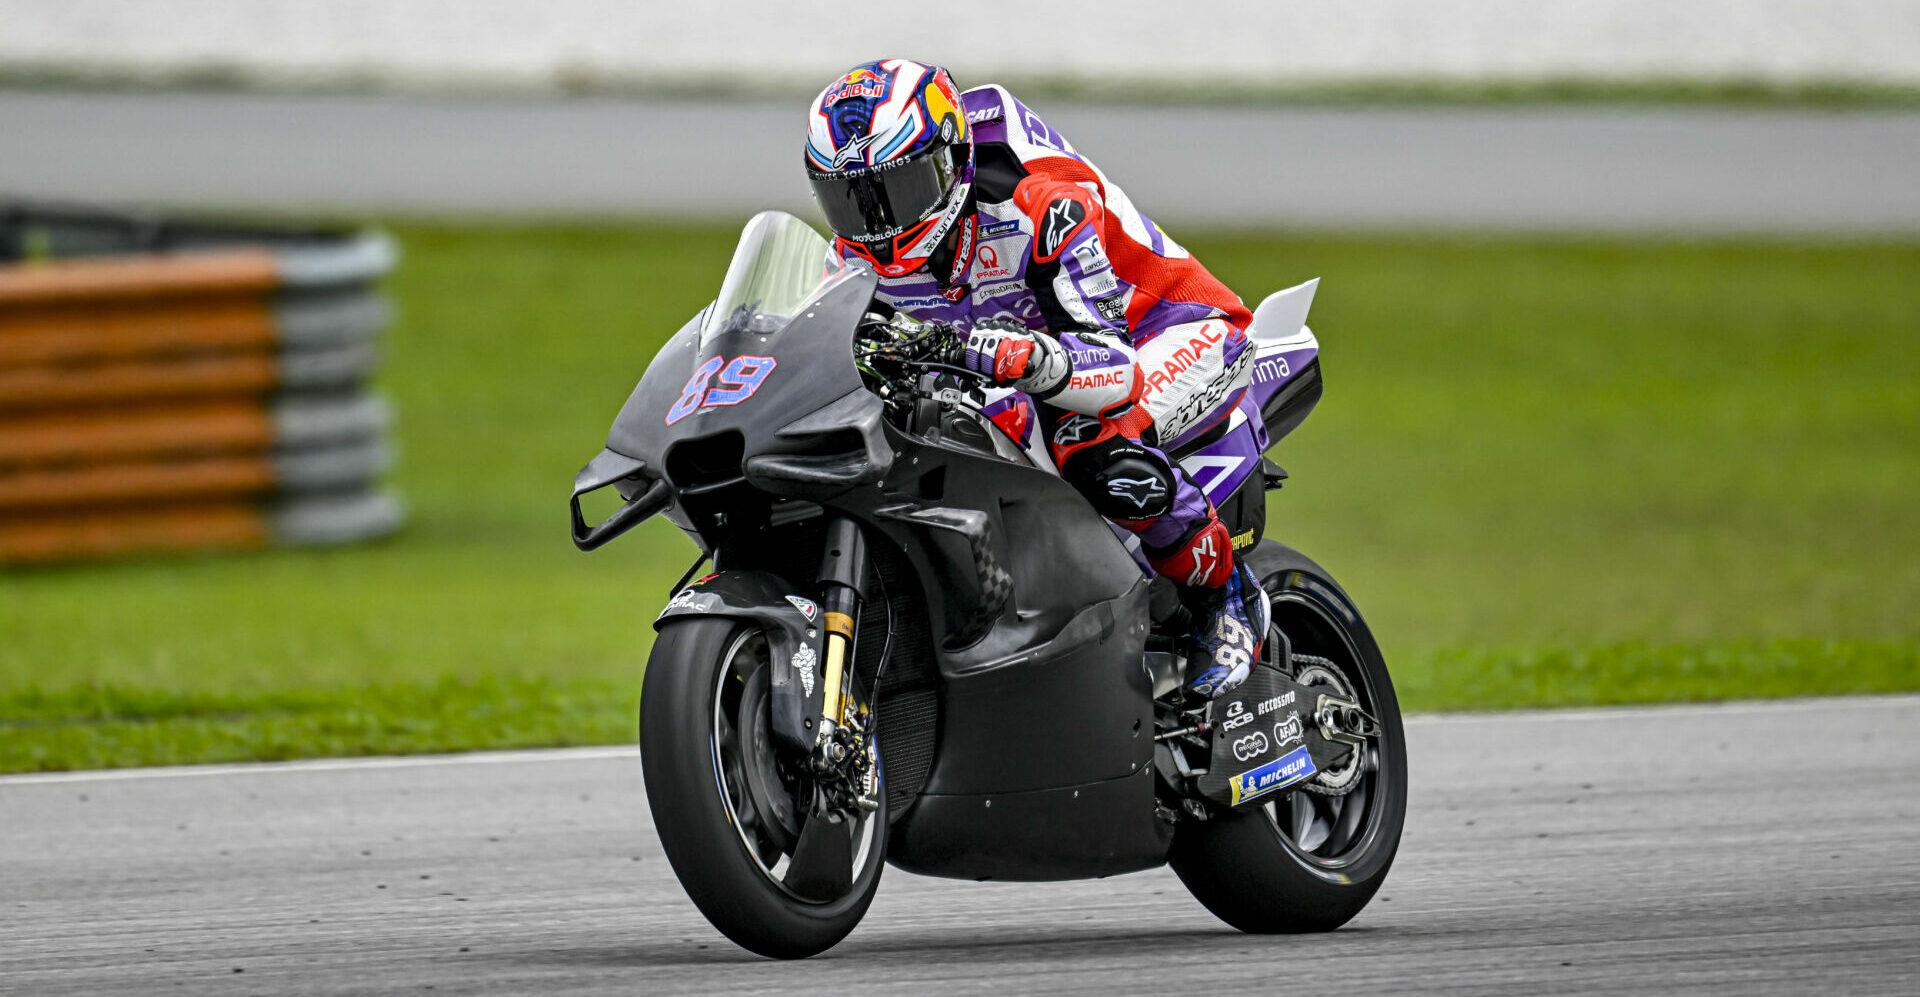 Jorge Martin (89), as seen during one of the brief dry periods on Saturday at Sepang. Photo courtesy Dorna.